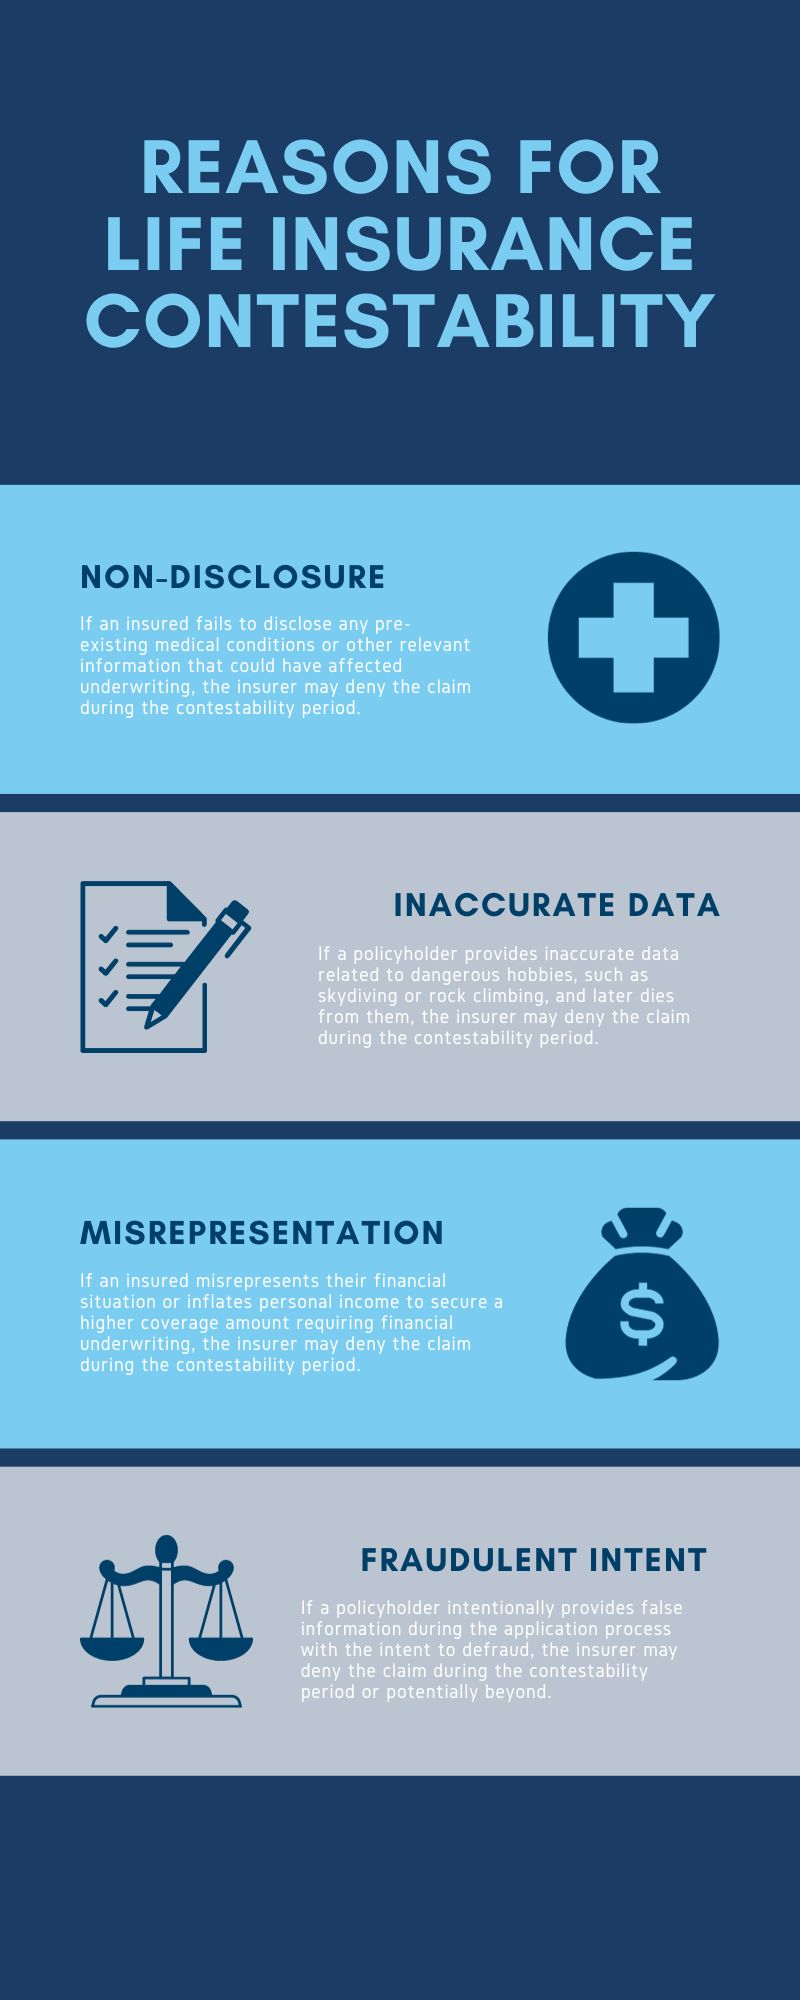 Reasons for Life Insurance Contestability infographic